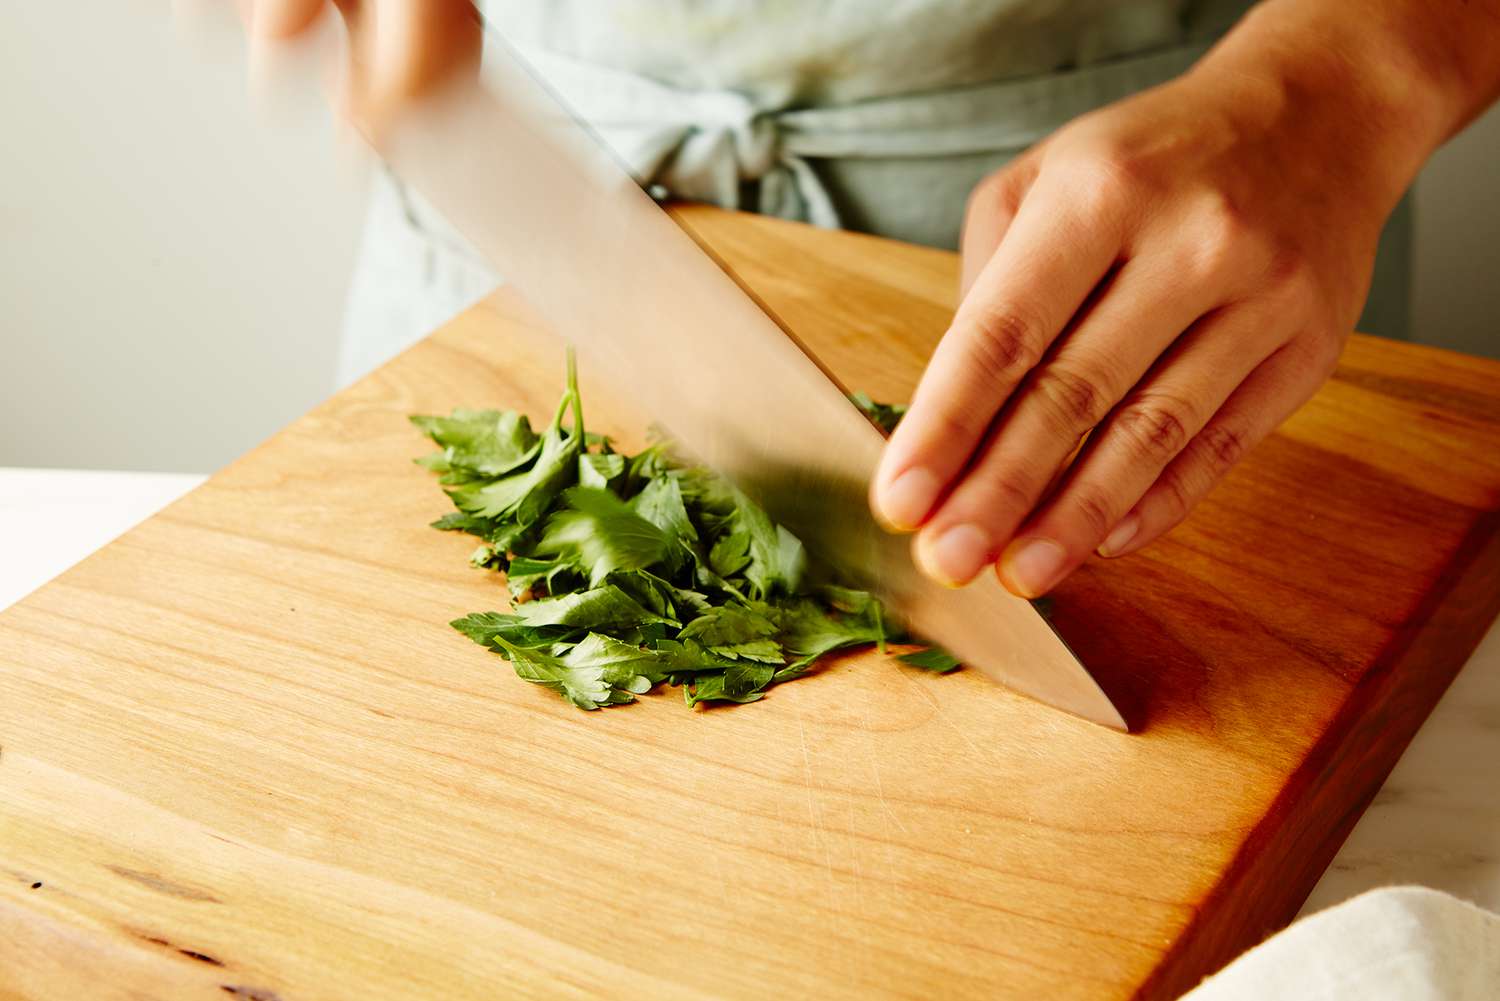 Midsection of person cutting parsley in kitchen